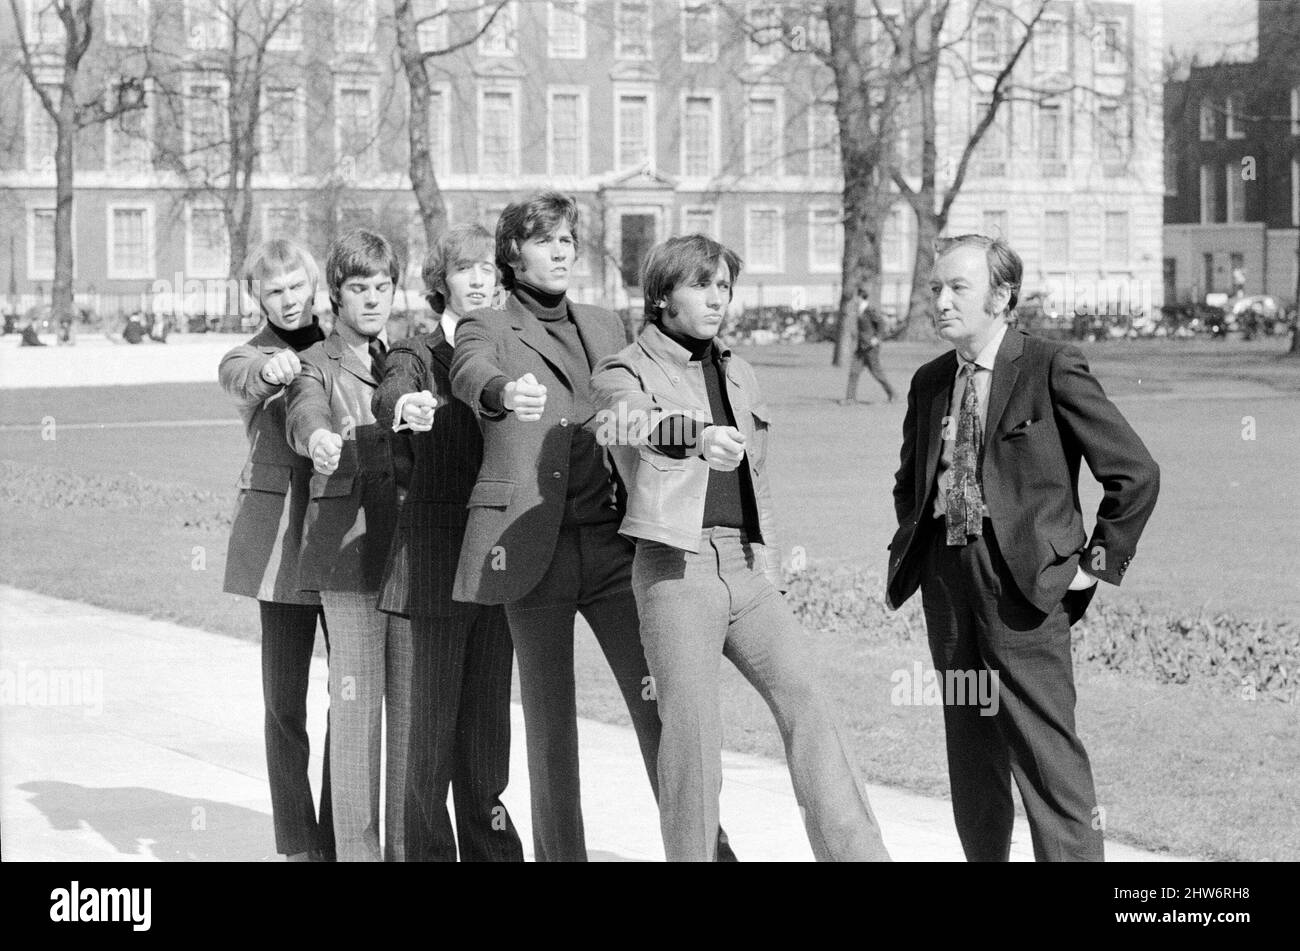 The Bee Gees are put through their paces by Britain's top comedy writer Johnny Speight, who will be writing the screenplay for their first full length feature film 'Lord Kitchener's Little Drummer Boys'. The plot concerns the press ganging of the boys to join the army as bandsmen during the Boer War, filming starts later this year.   Johnny marches The Bee Gees through London as he gives them a taste of what's to come 29th March 1968.    Pictured (l to r) Vince Melouney, Colin Peterson, Robin Gibb, Barry Gigg & Maurice Gibb with Johnny Speight Stock Photo